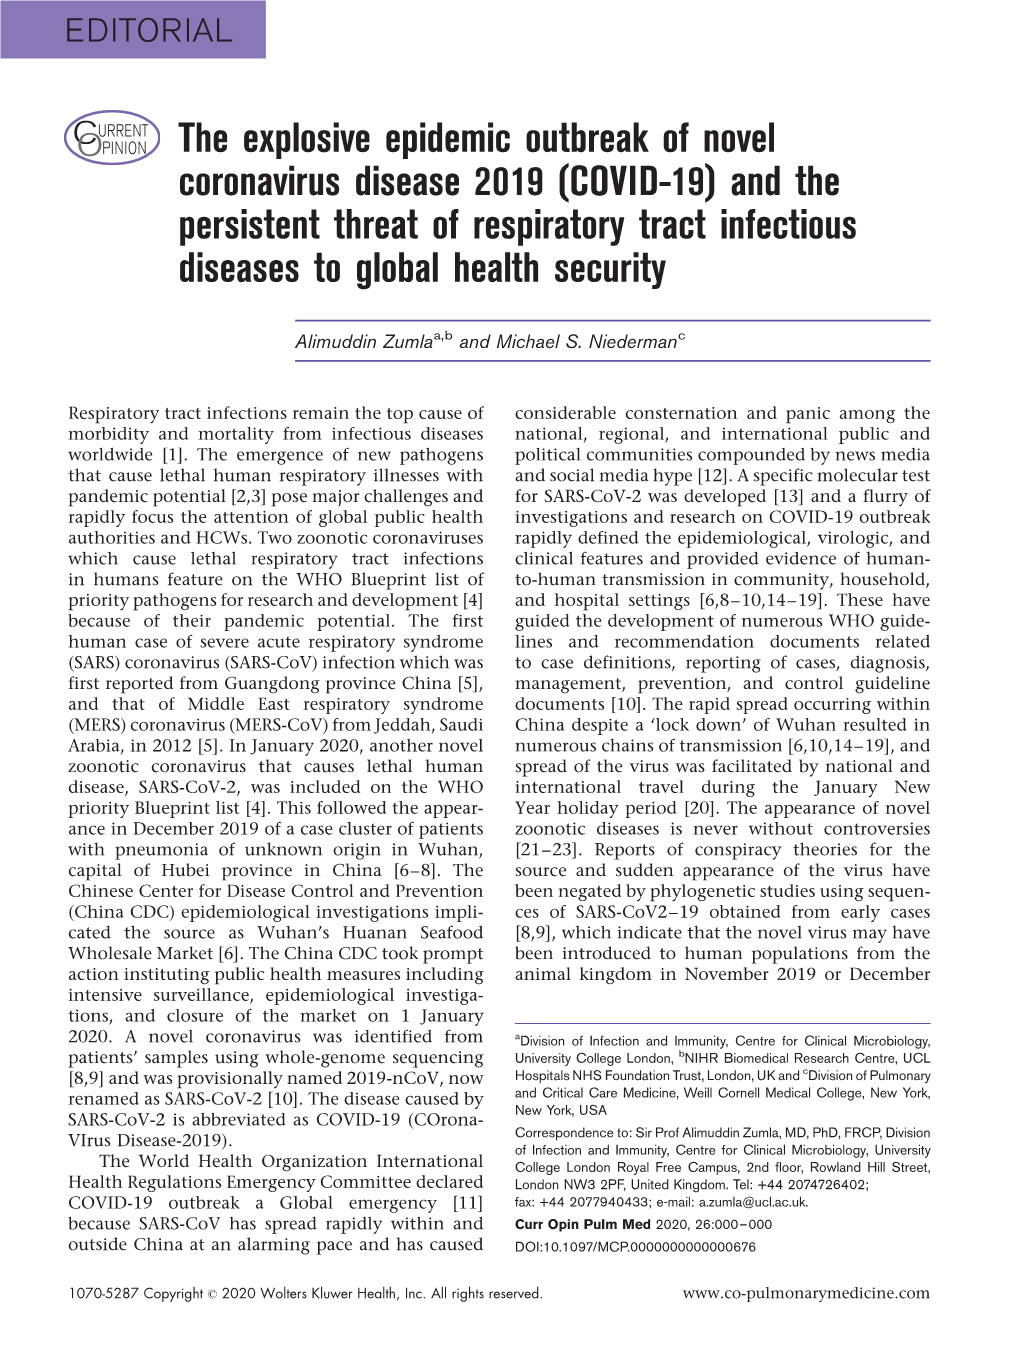 (COVID-19) and the Persistent Threat of Respiratory Tract Infectious Diseases to Global Health Security